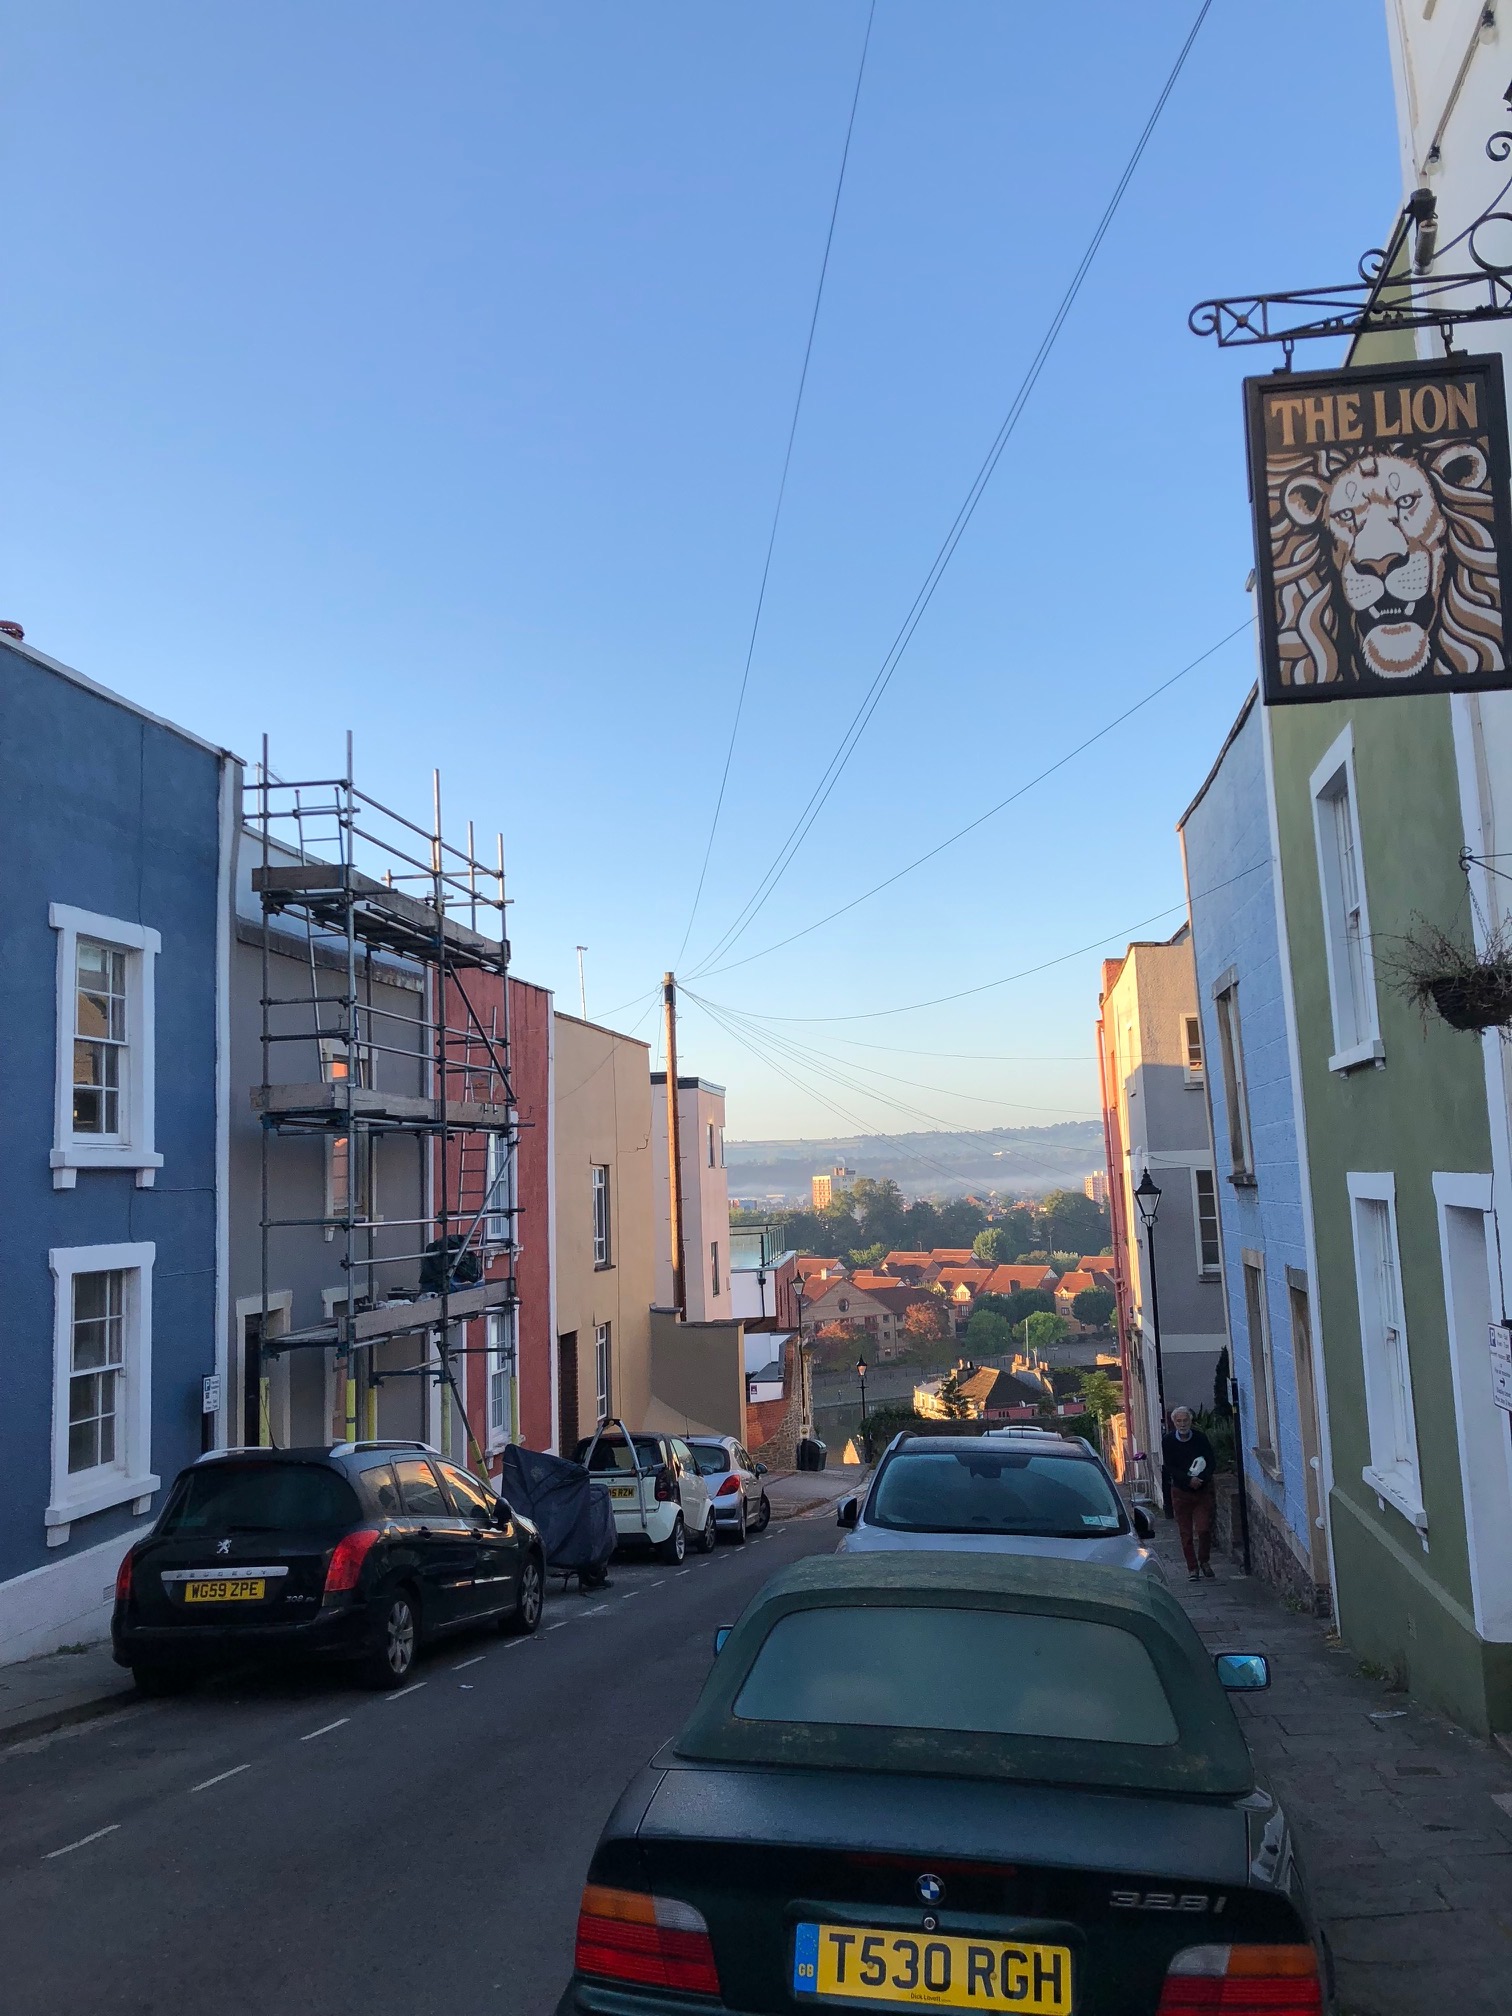 This is a photo of Bristol in 2018, by Cliftonwood Crescent.